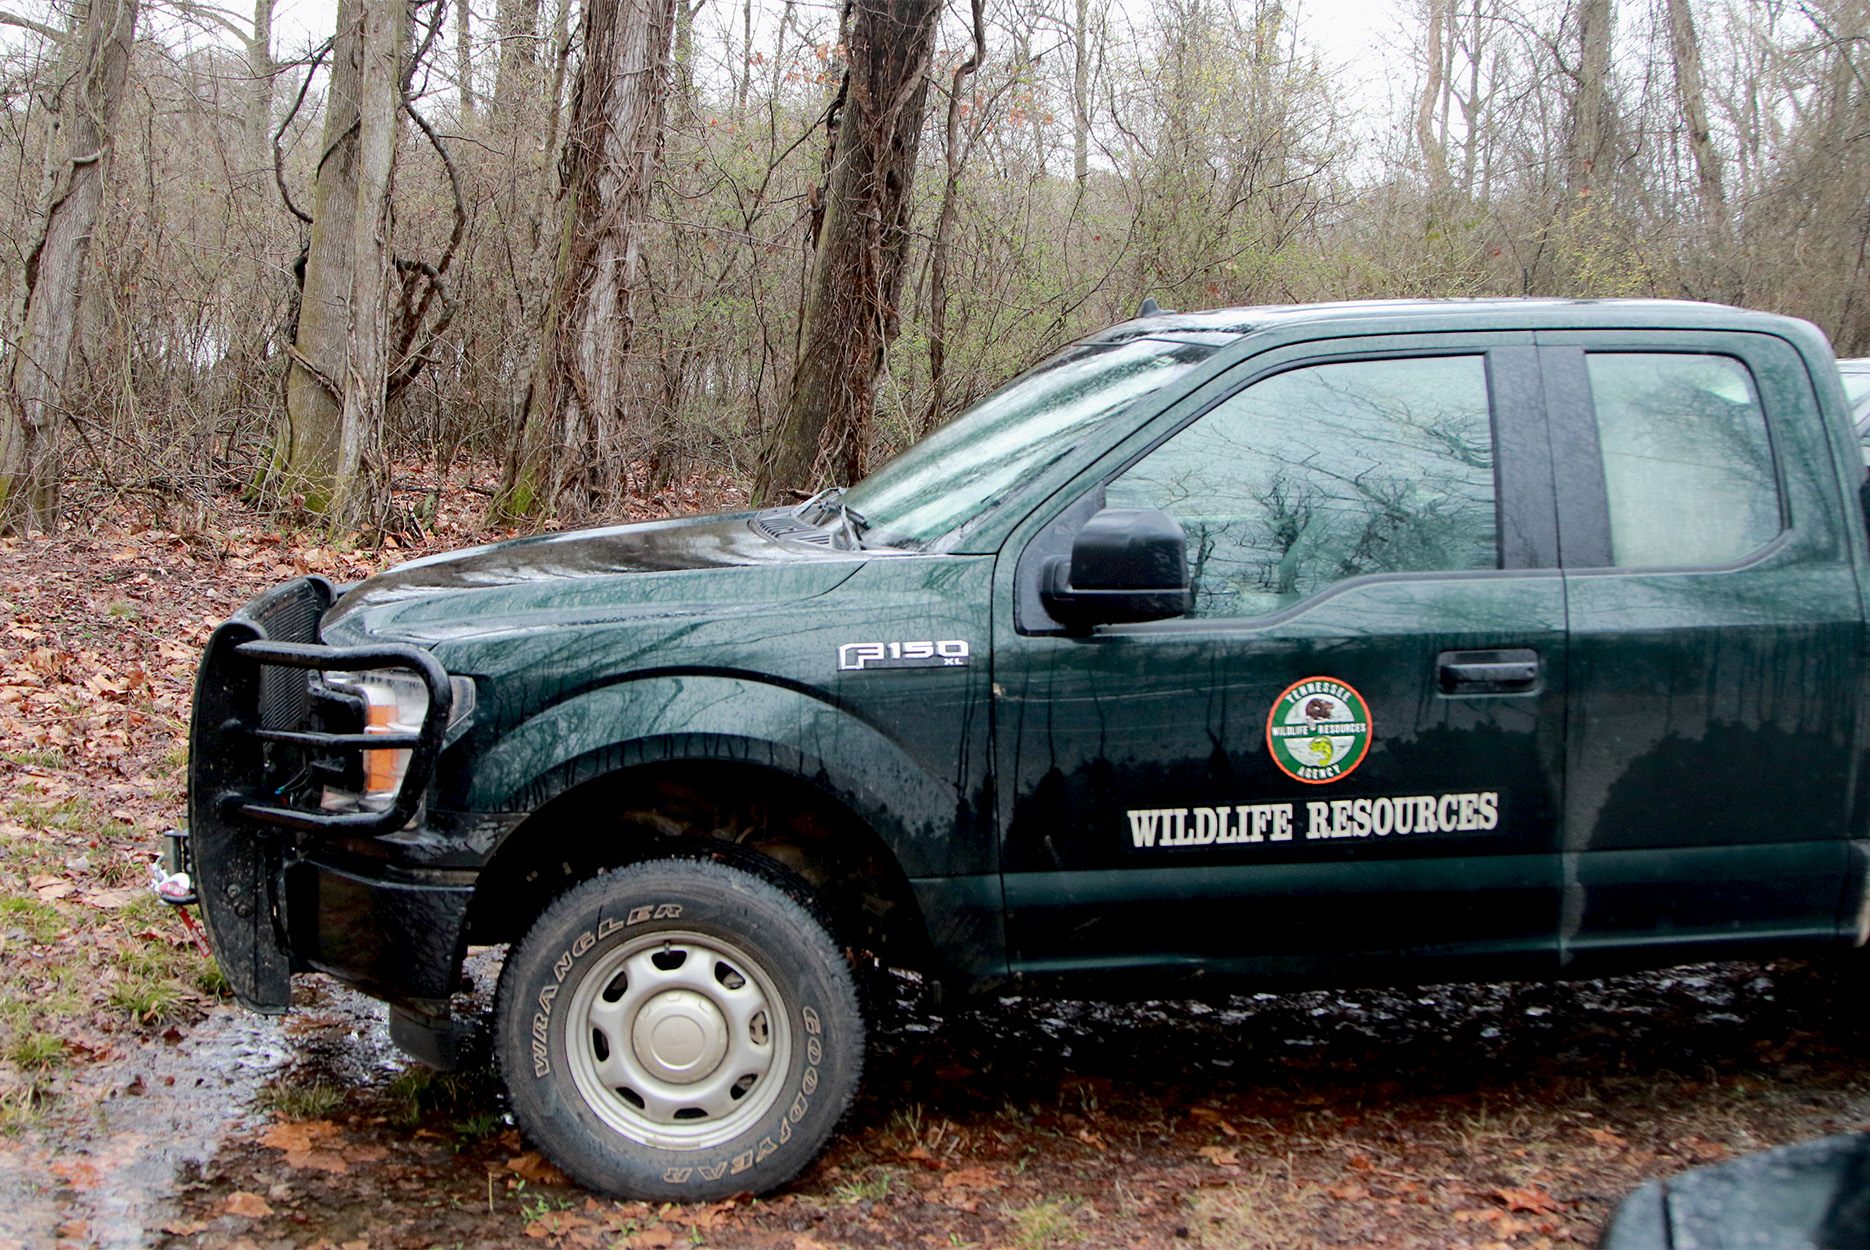 A Tennessee Wildlife Resources Agency vehicle.